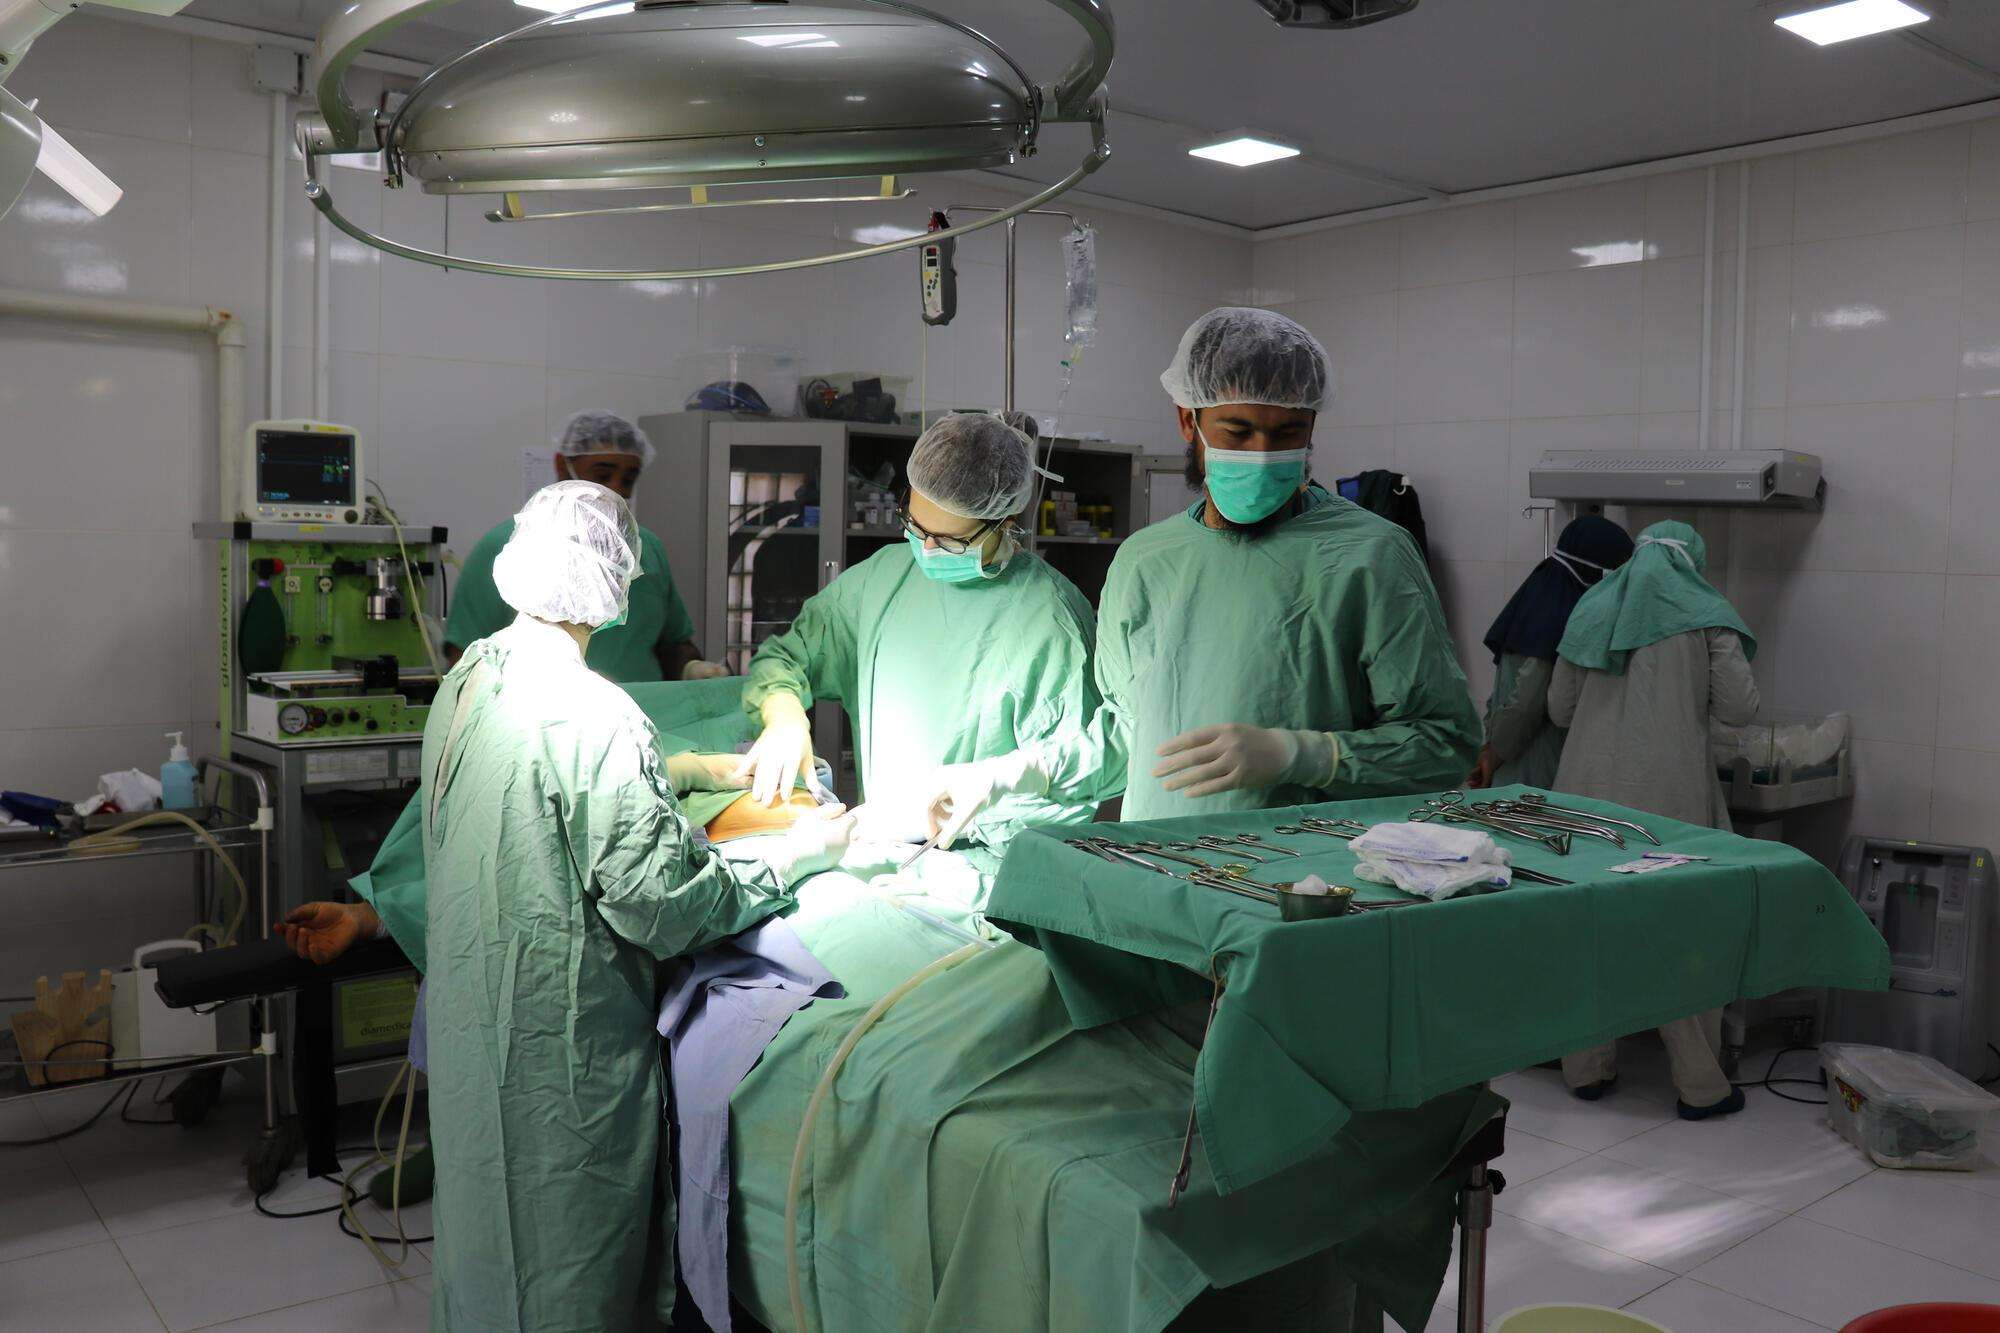 A medical team prepares to begin a surgery in the operating theater of Boost hospital, Lashkar Gah, Afghanistan.